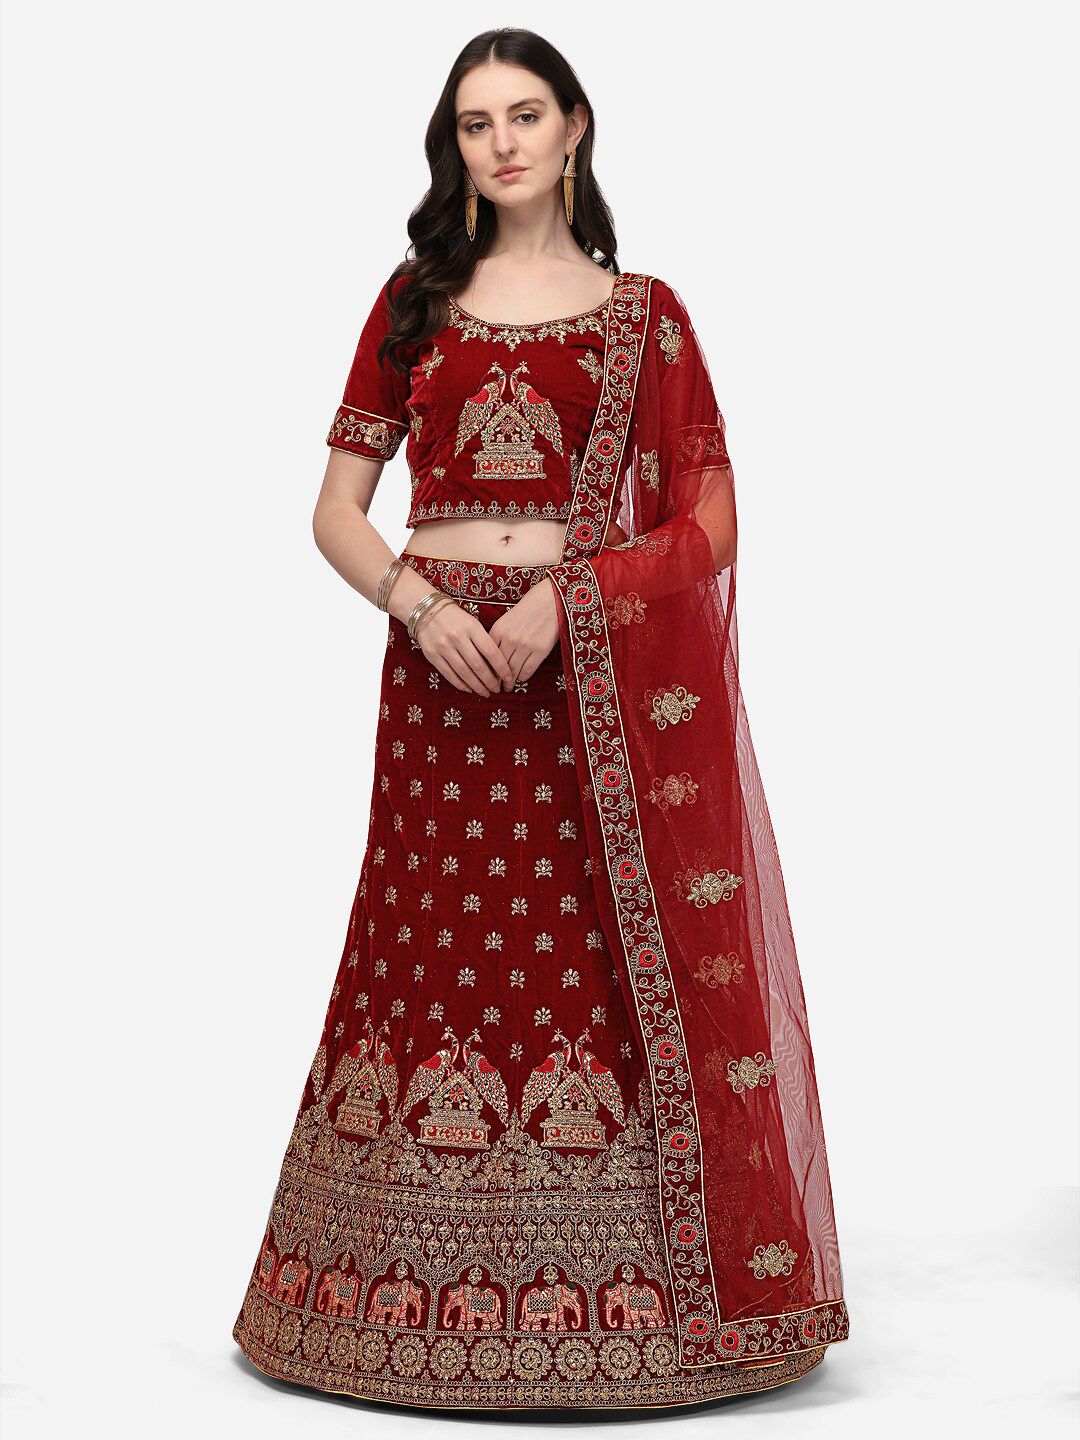 VRSALES Maroon & Gold-Toned Embroidered Zardozi Semi-Stitched Lehenga & Unstitched Blouse With Dupatta Price in India